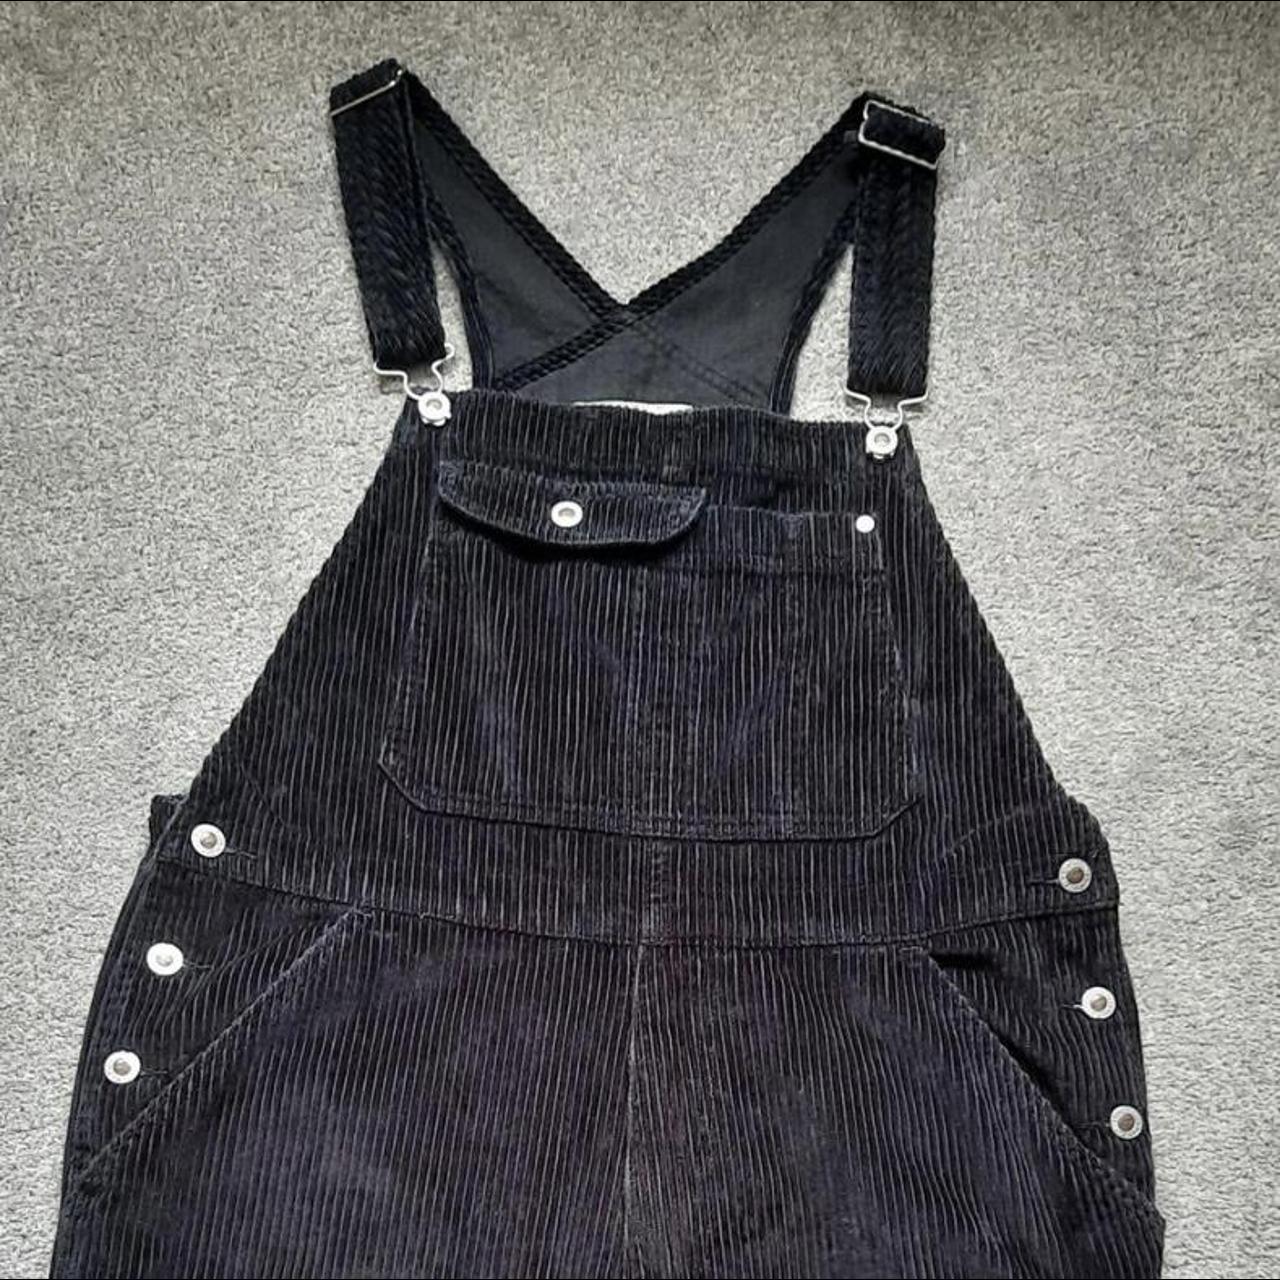 Levis silvertab black corduroy dungarees with silver... - Depop